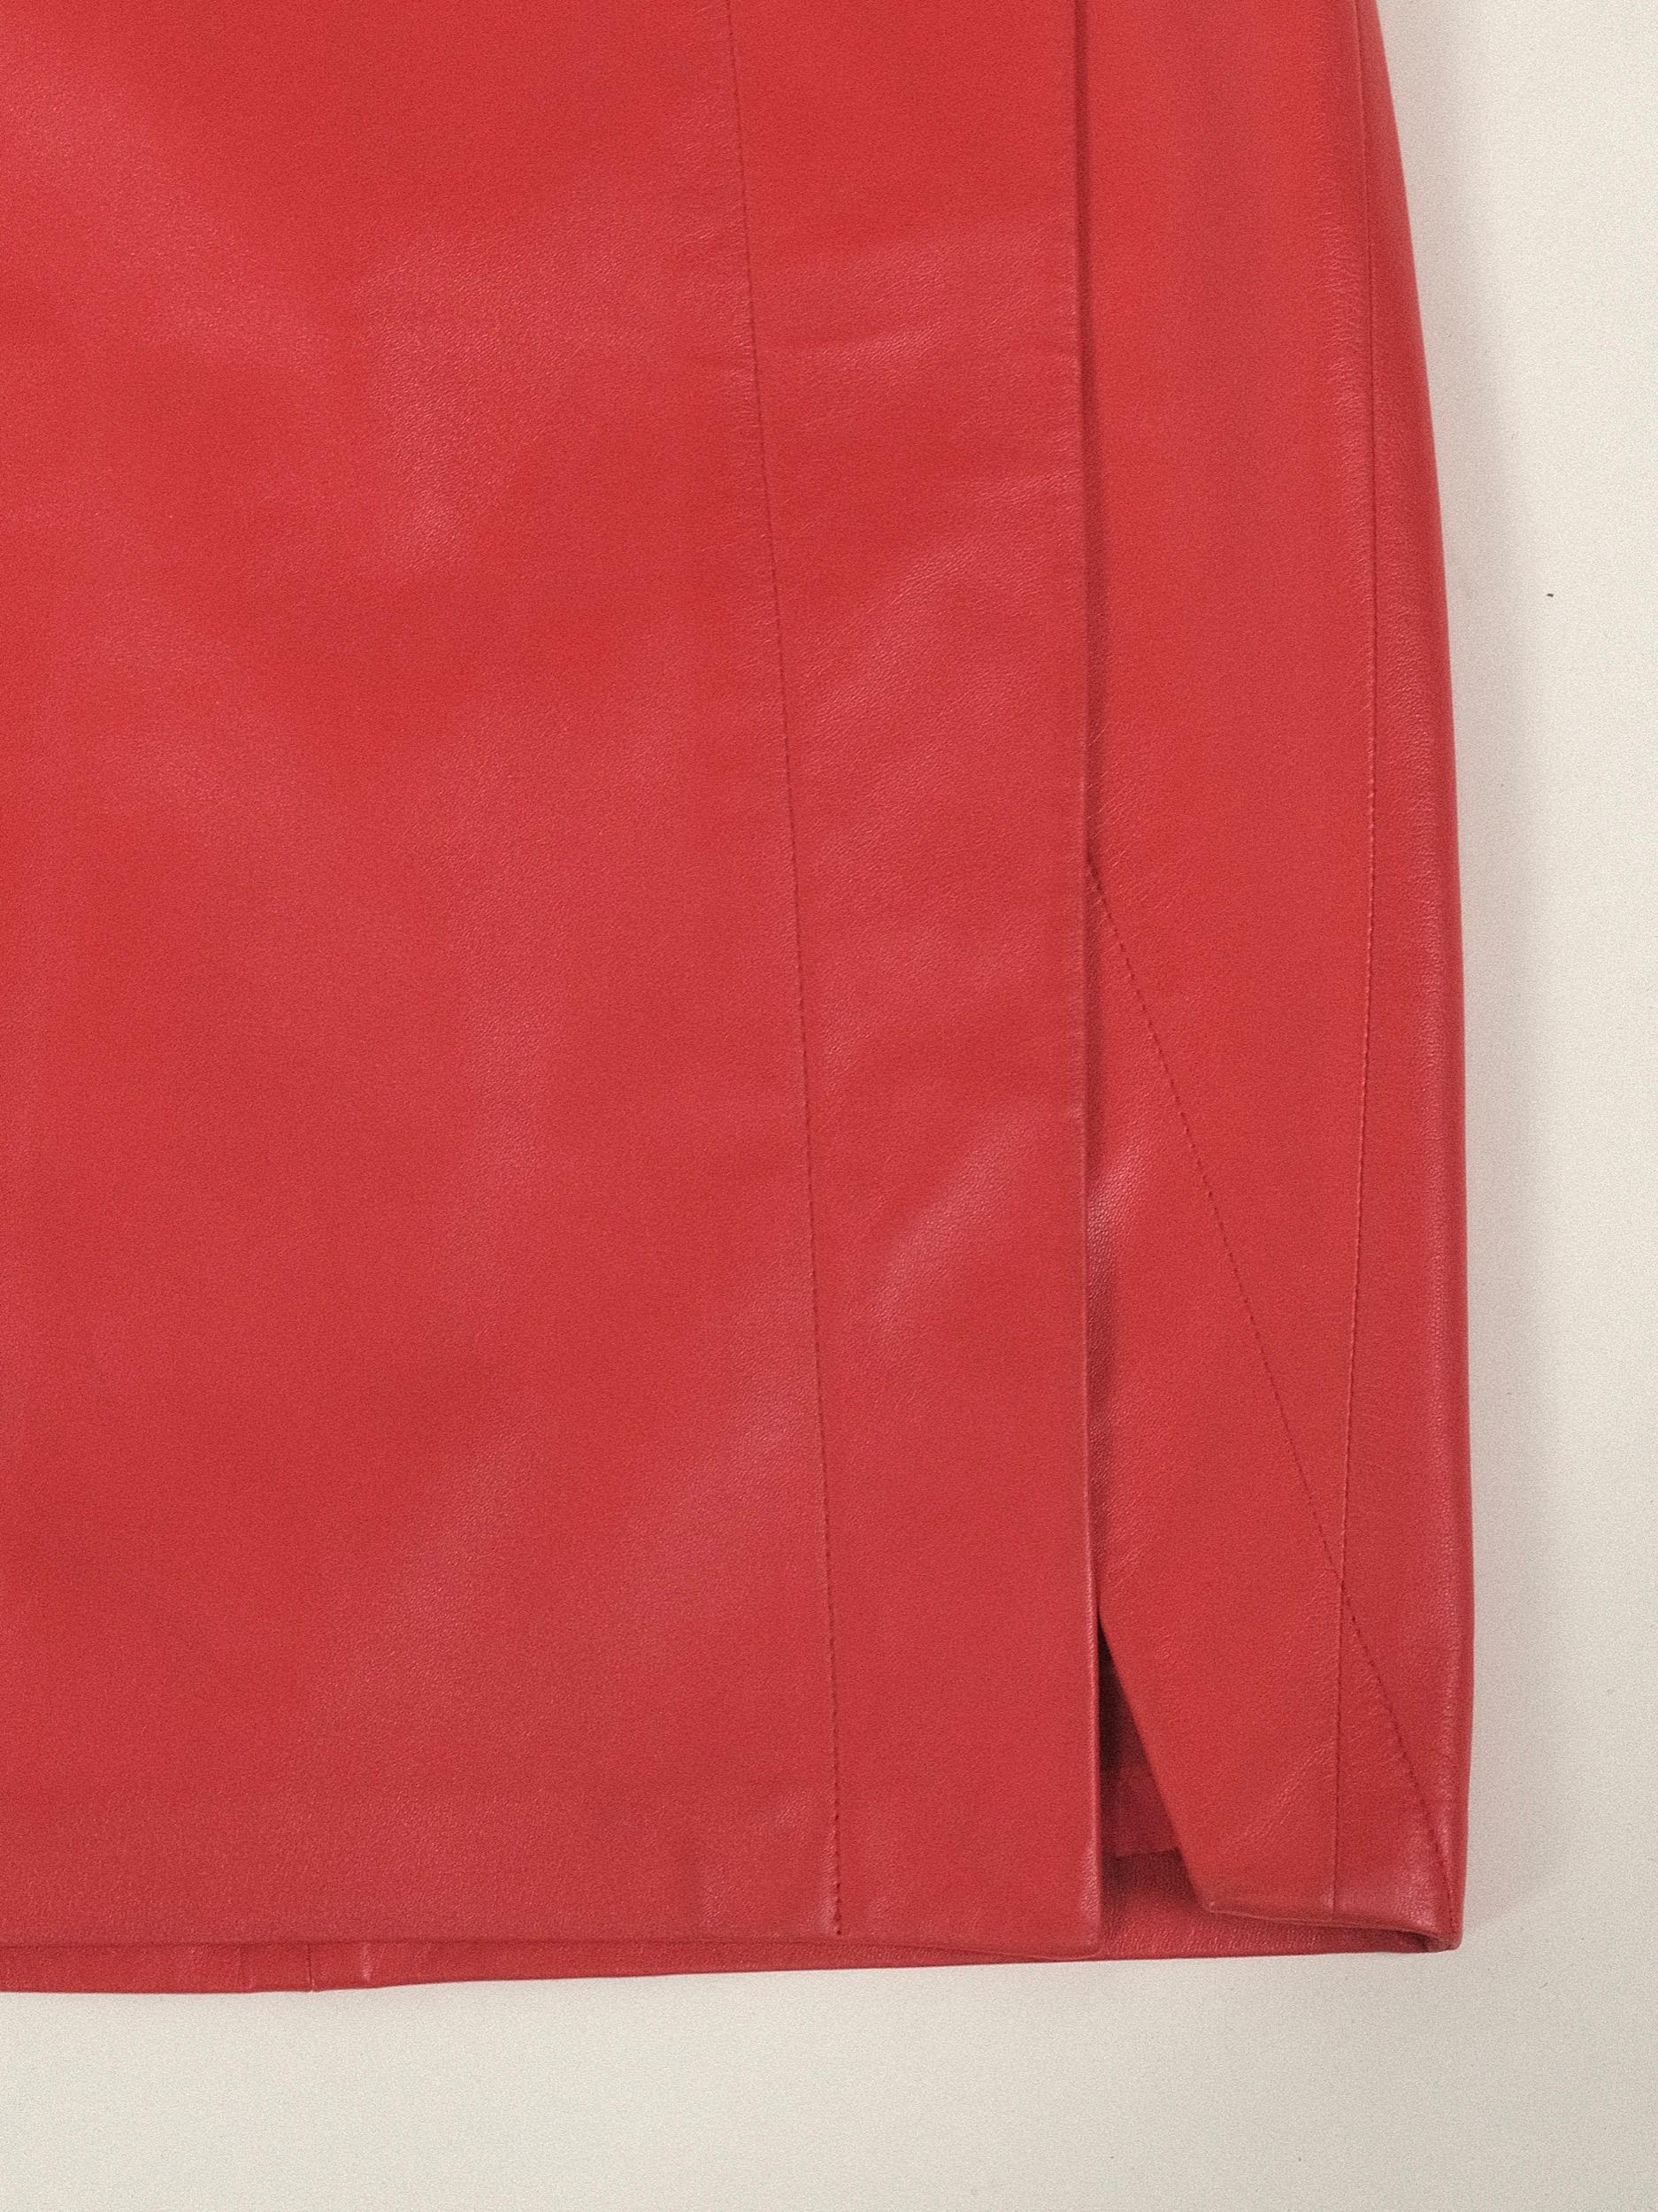 Donna Karan Leather Wrap Skirt Tomato Red Size US4 IT40 FR38 1990's For Sale 15